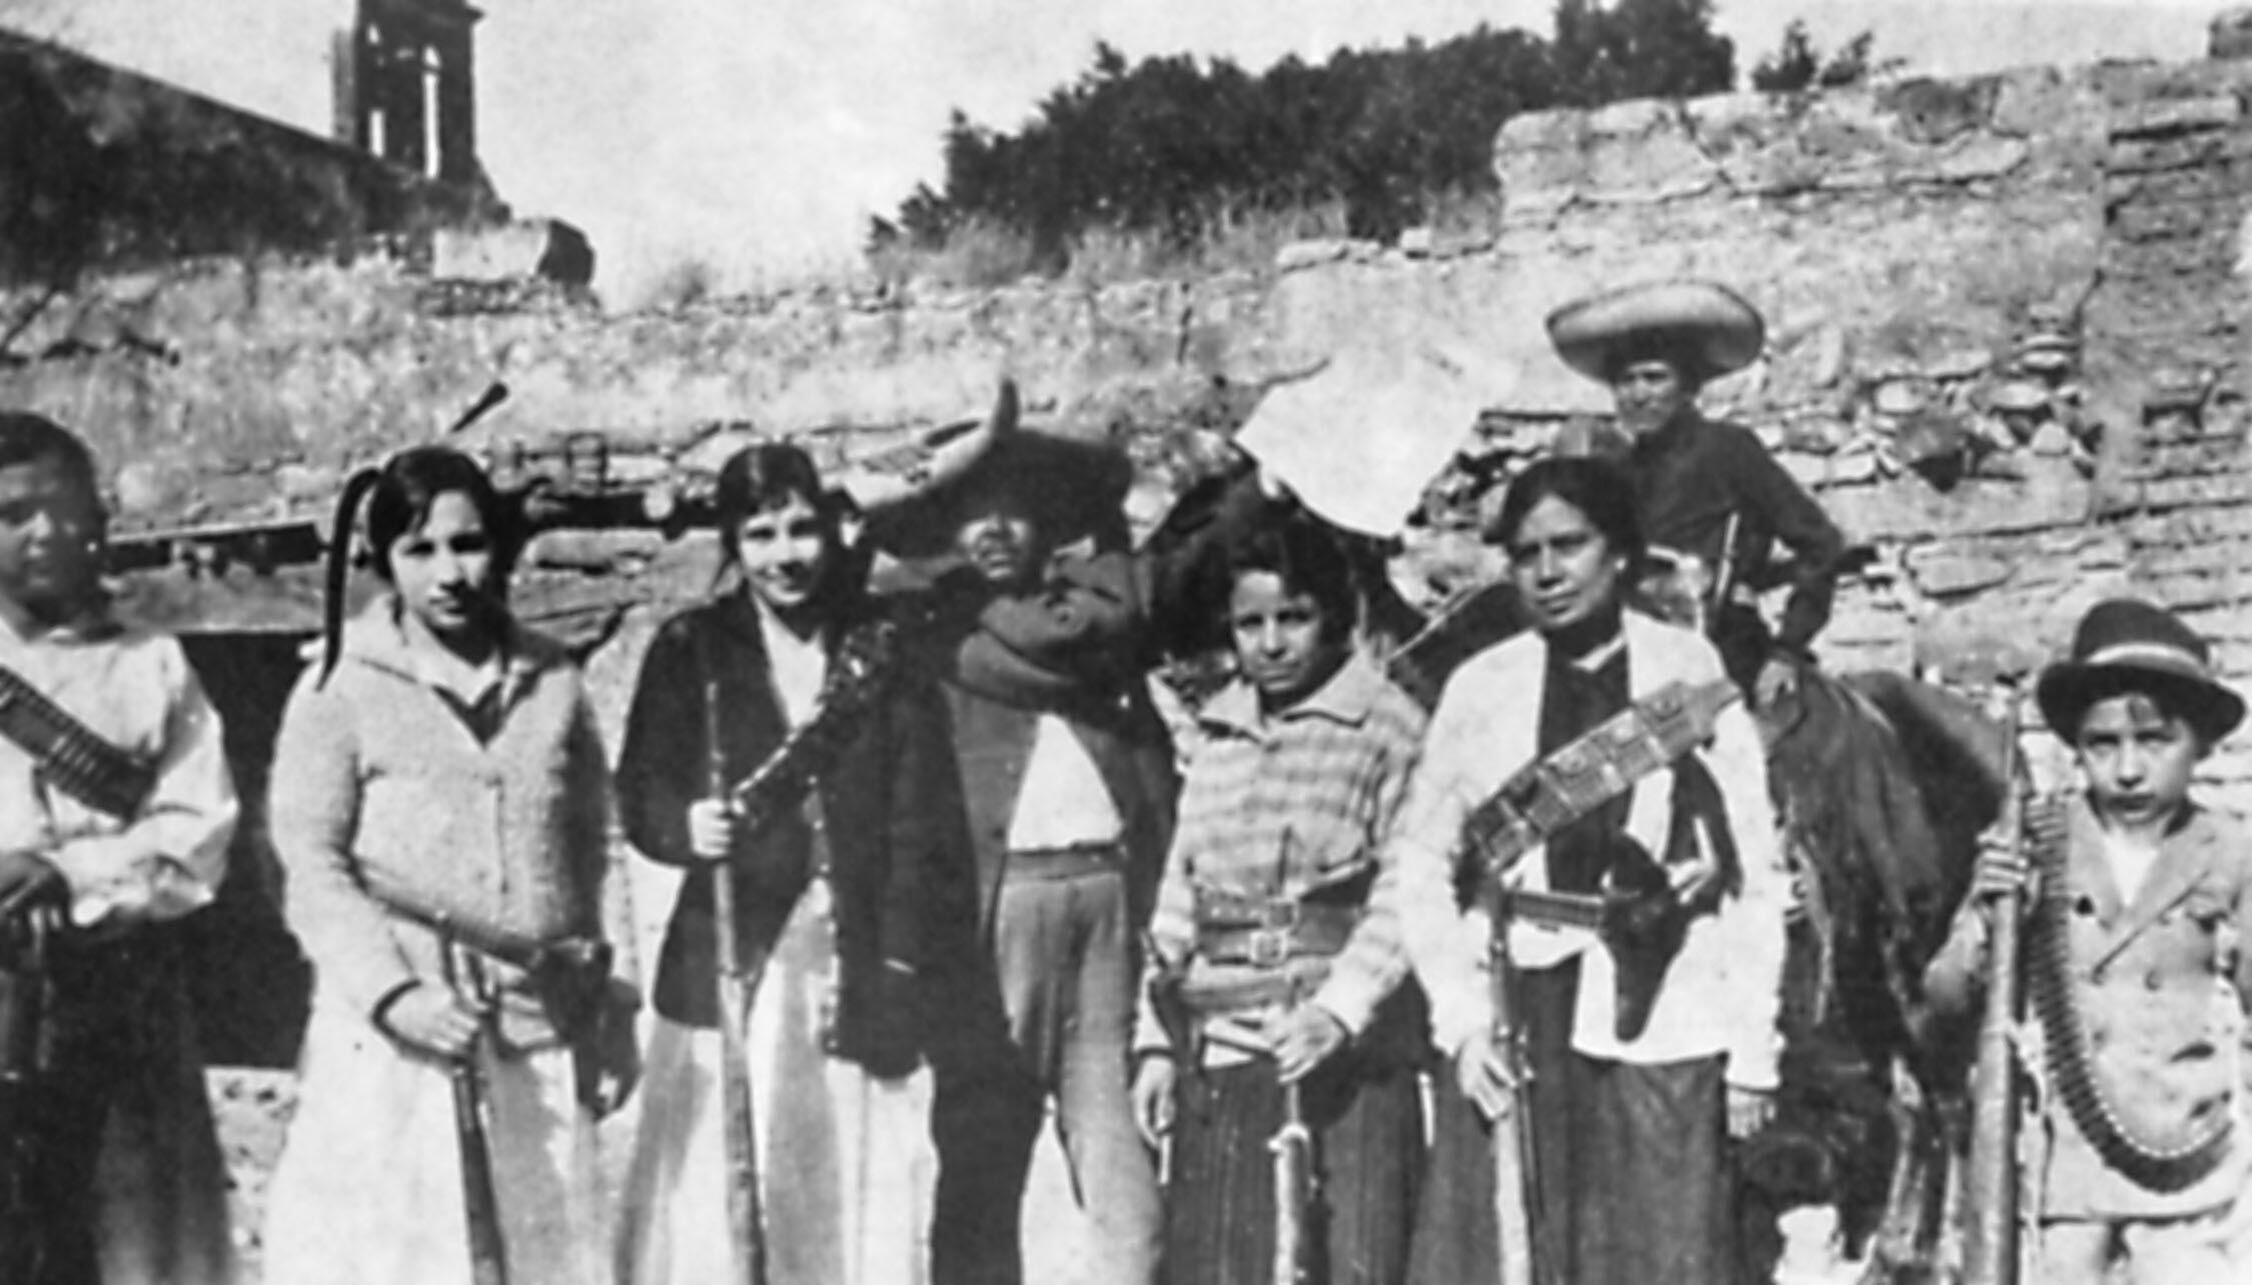 Female soldiers lined up with rifles and bandoliers during the Cristero War. (Photo courtesy of StoriaLibera.)